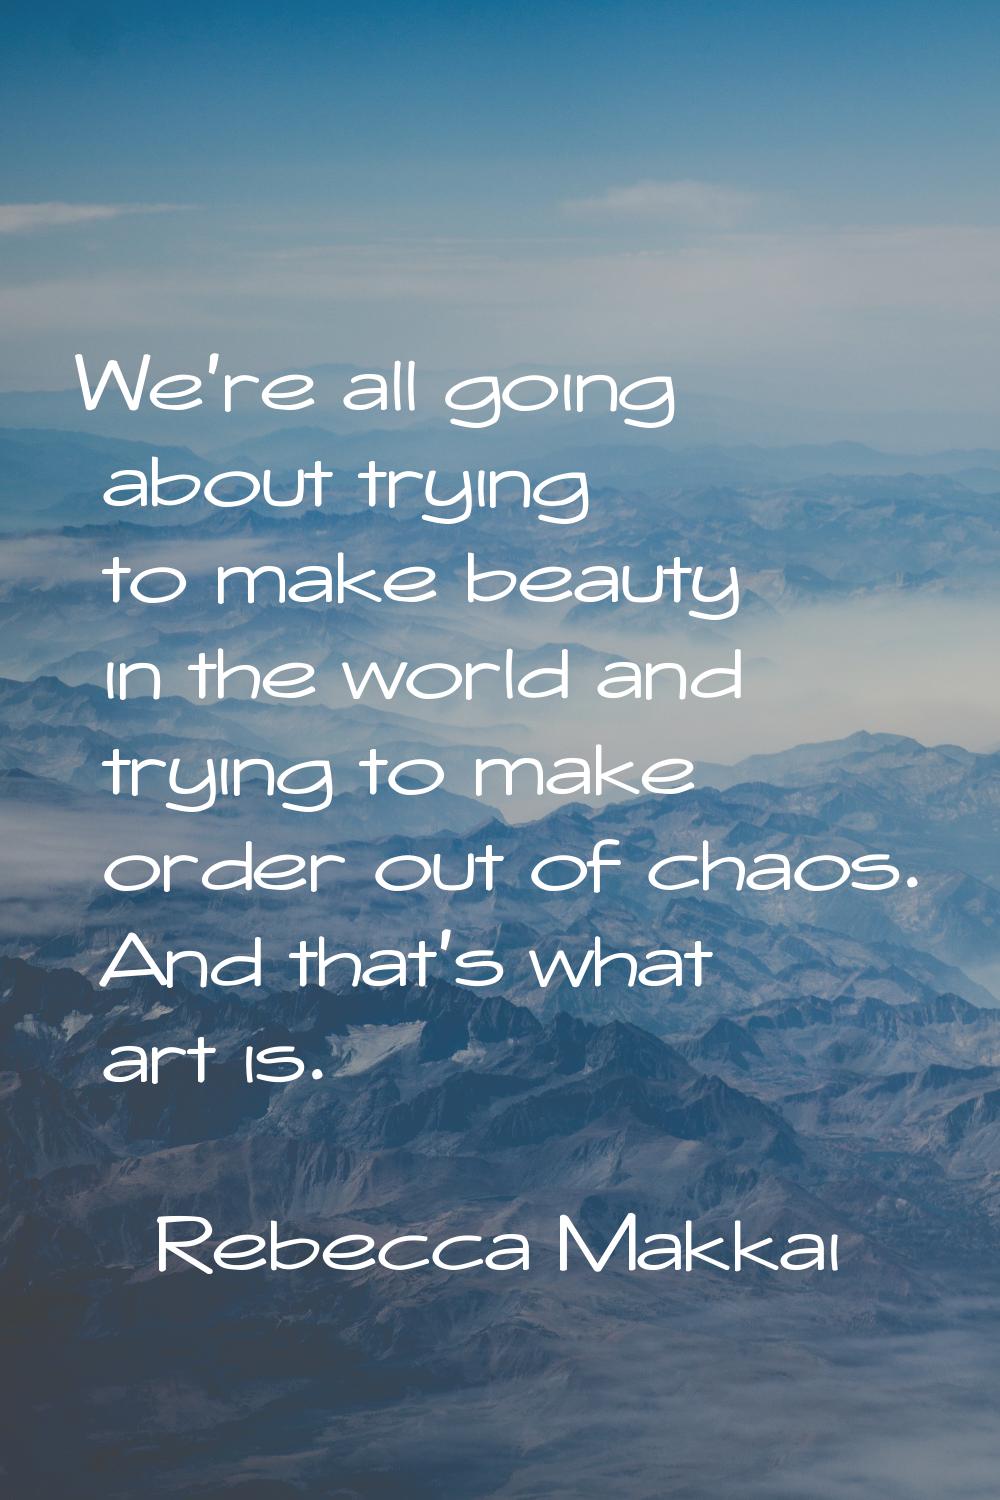 We're all going about trying to make beauty in the world and trying to make order out of chaos. And